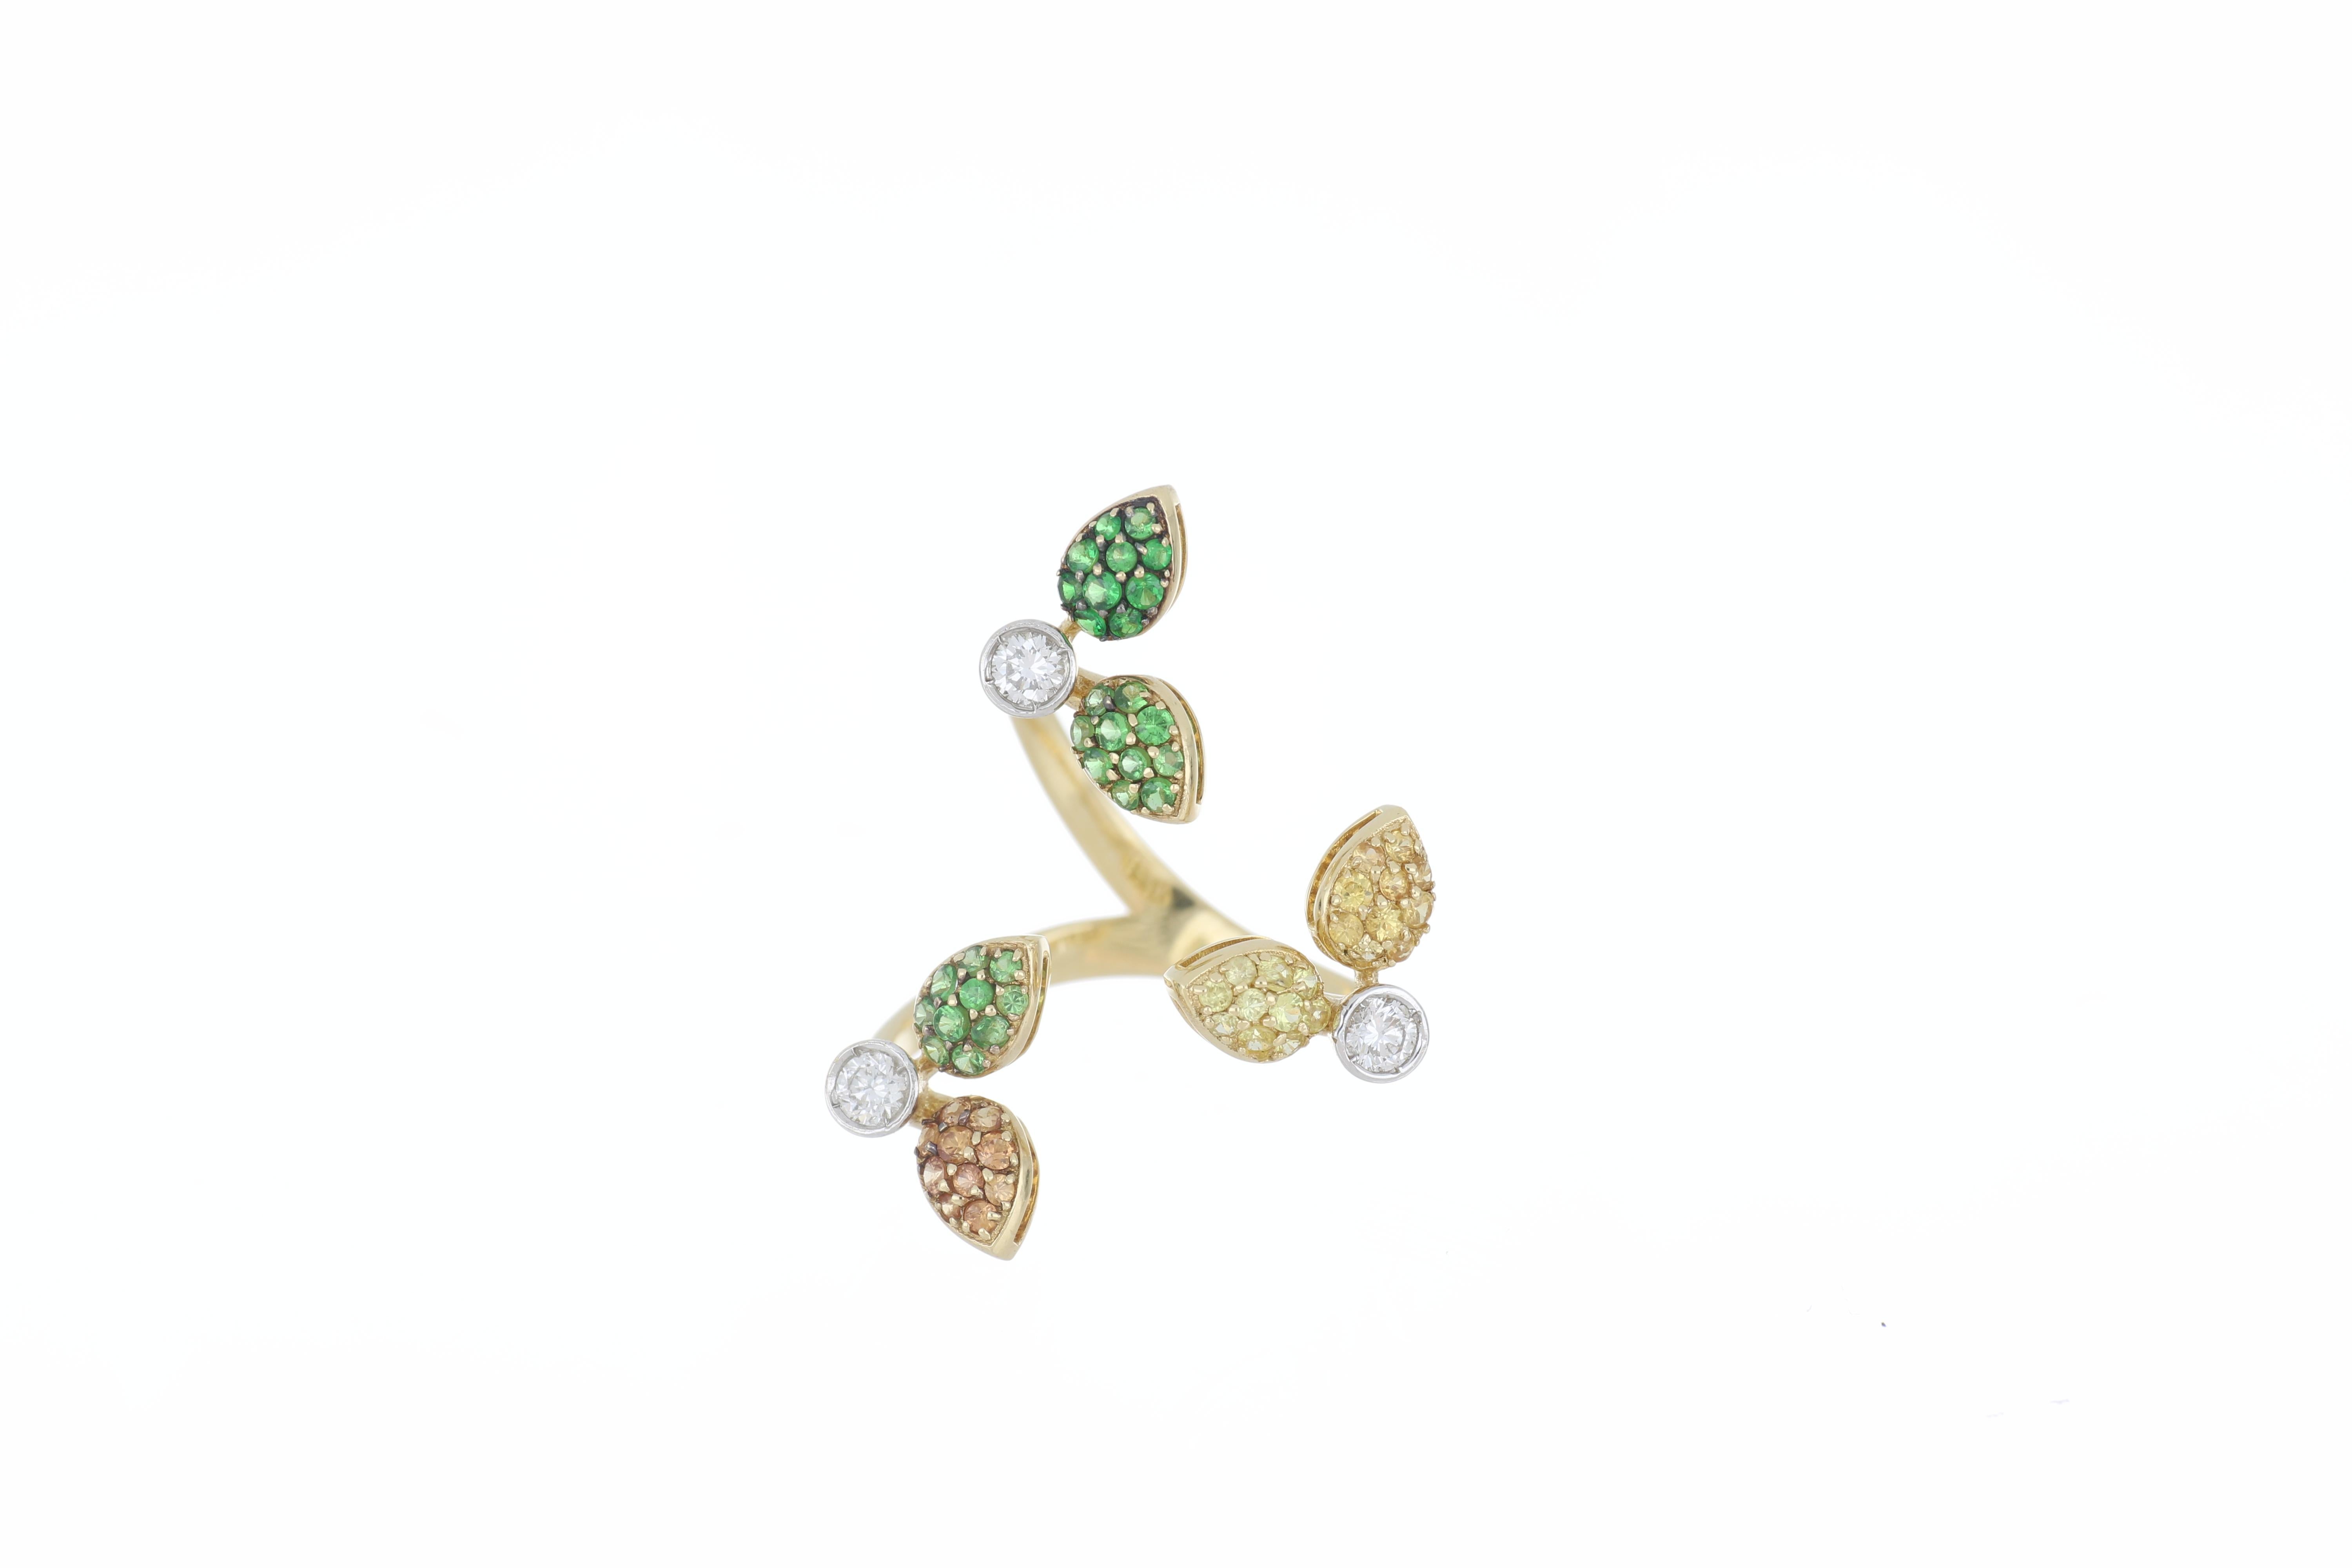 This gorgeous, playful ring was inspired by Pollicino. Small and dainty, this 18k yellow gold ring’s beauty mimics a magical, fairytale. Alluring and enchanting, this ring is made of 3 flowers with green, yellow, and pink petals created with